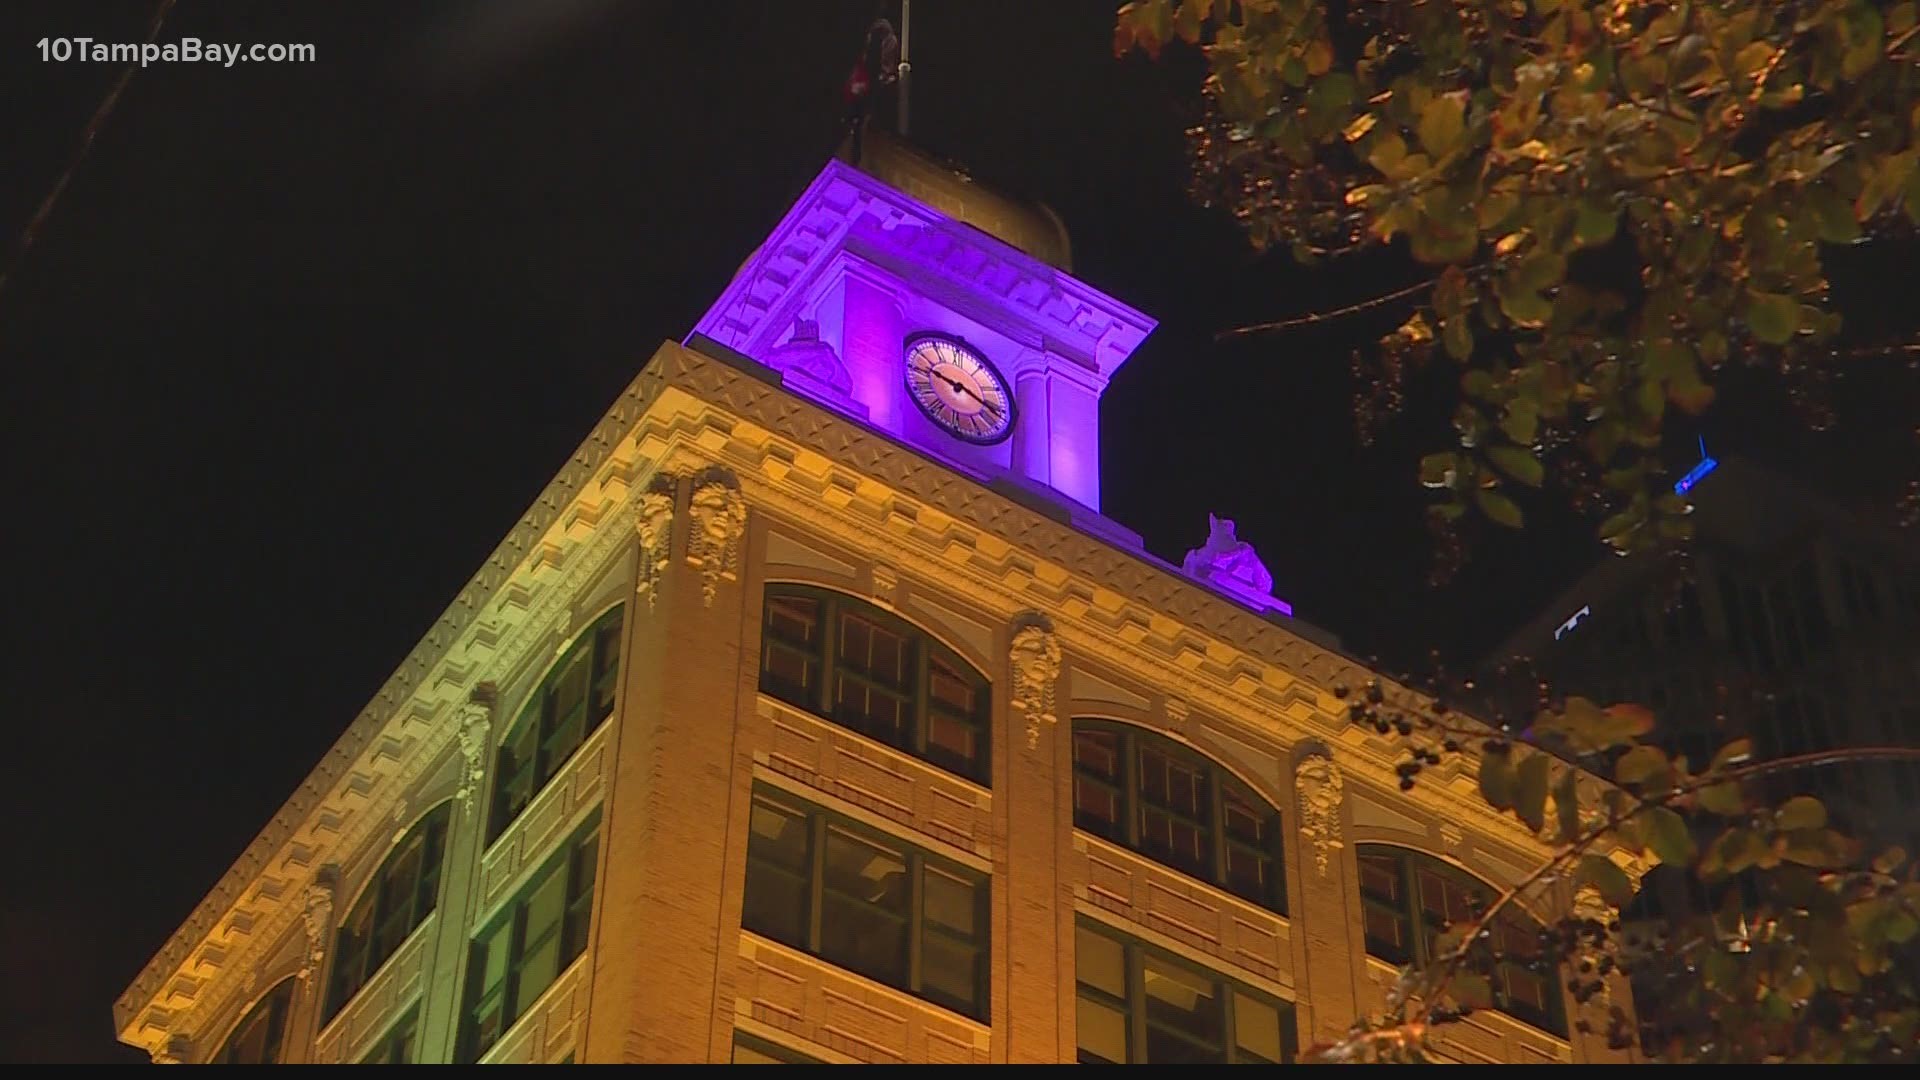 Old City Hall will be illuminated with purple and gold in remembrance and salute to Gold Star families after dusk.